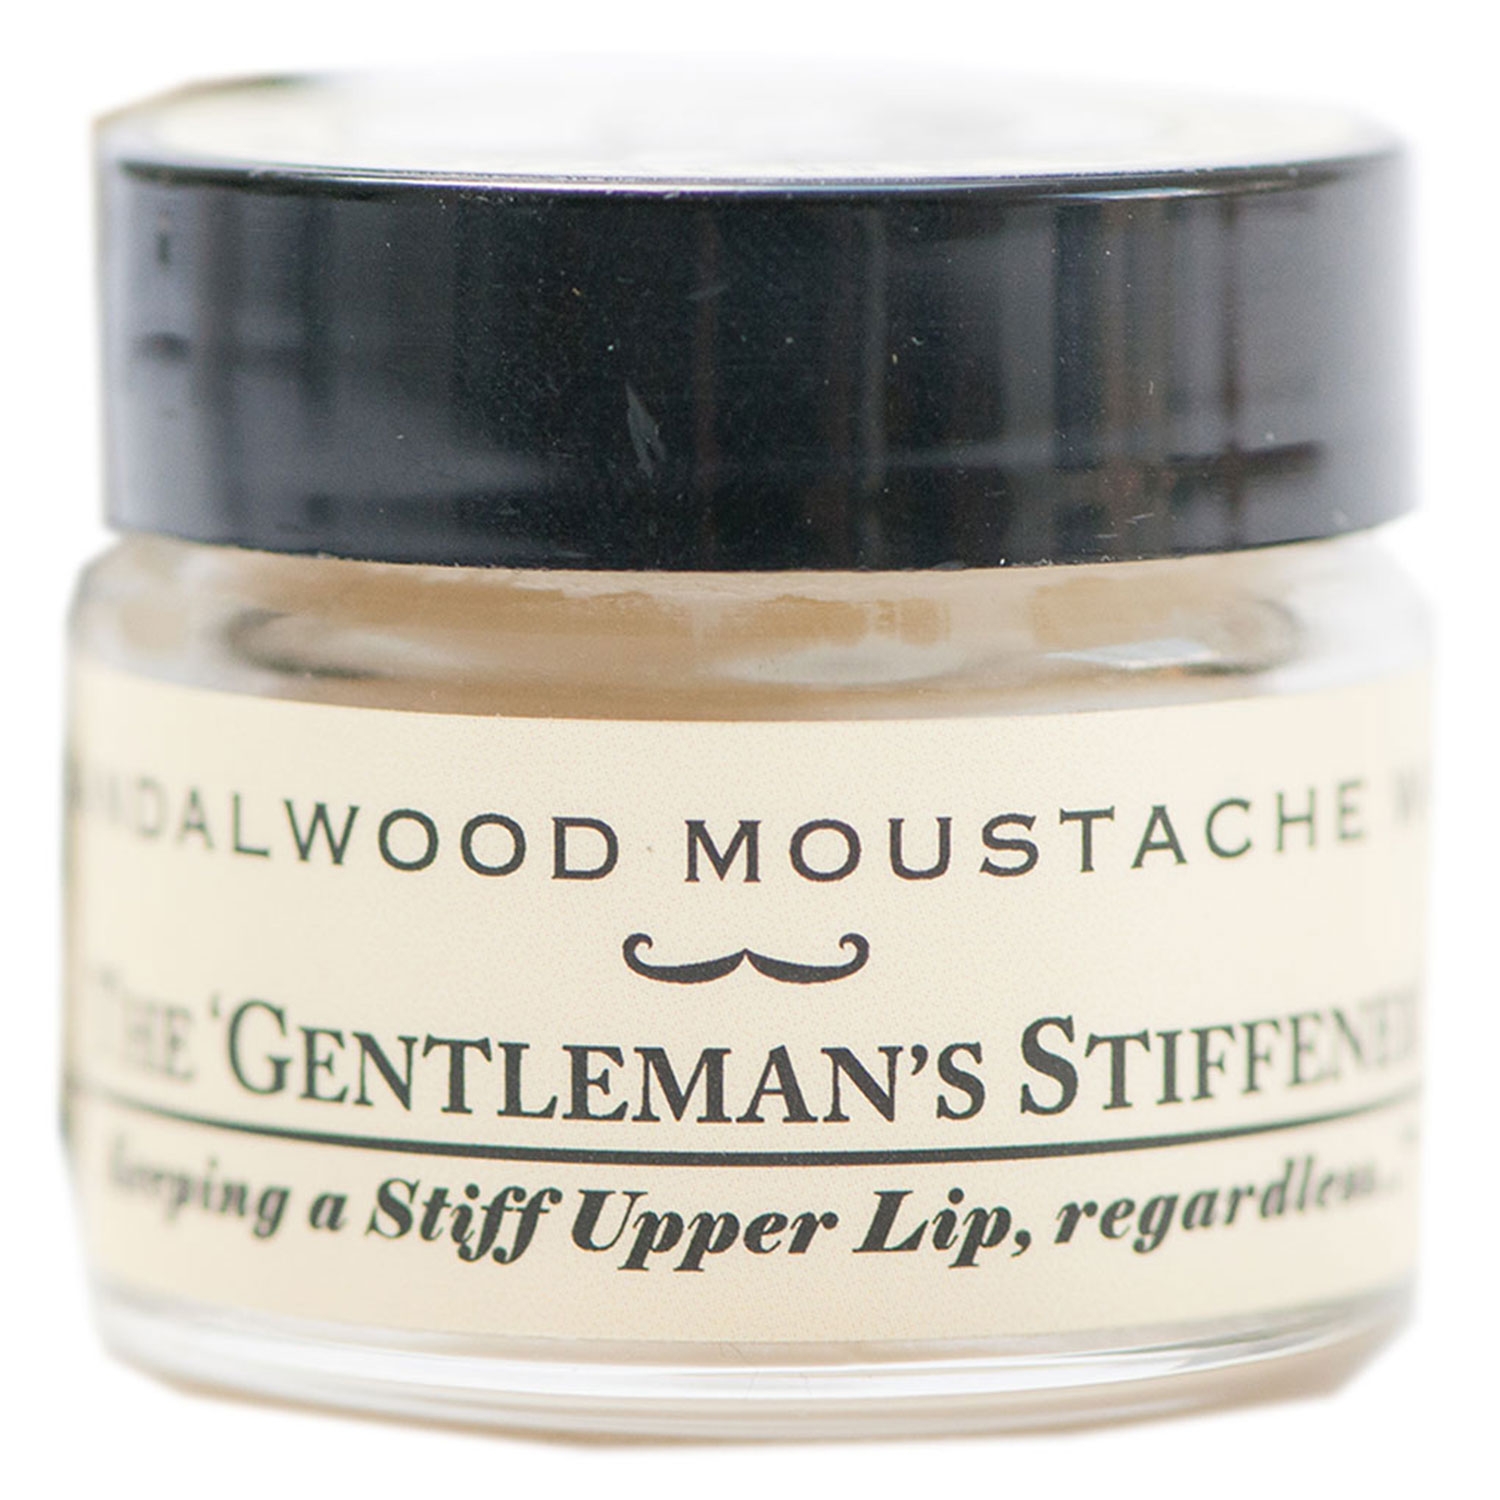 Product image from Capt. Fawcett Care - Sandalwood Moustache Wax